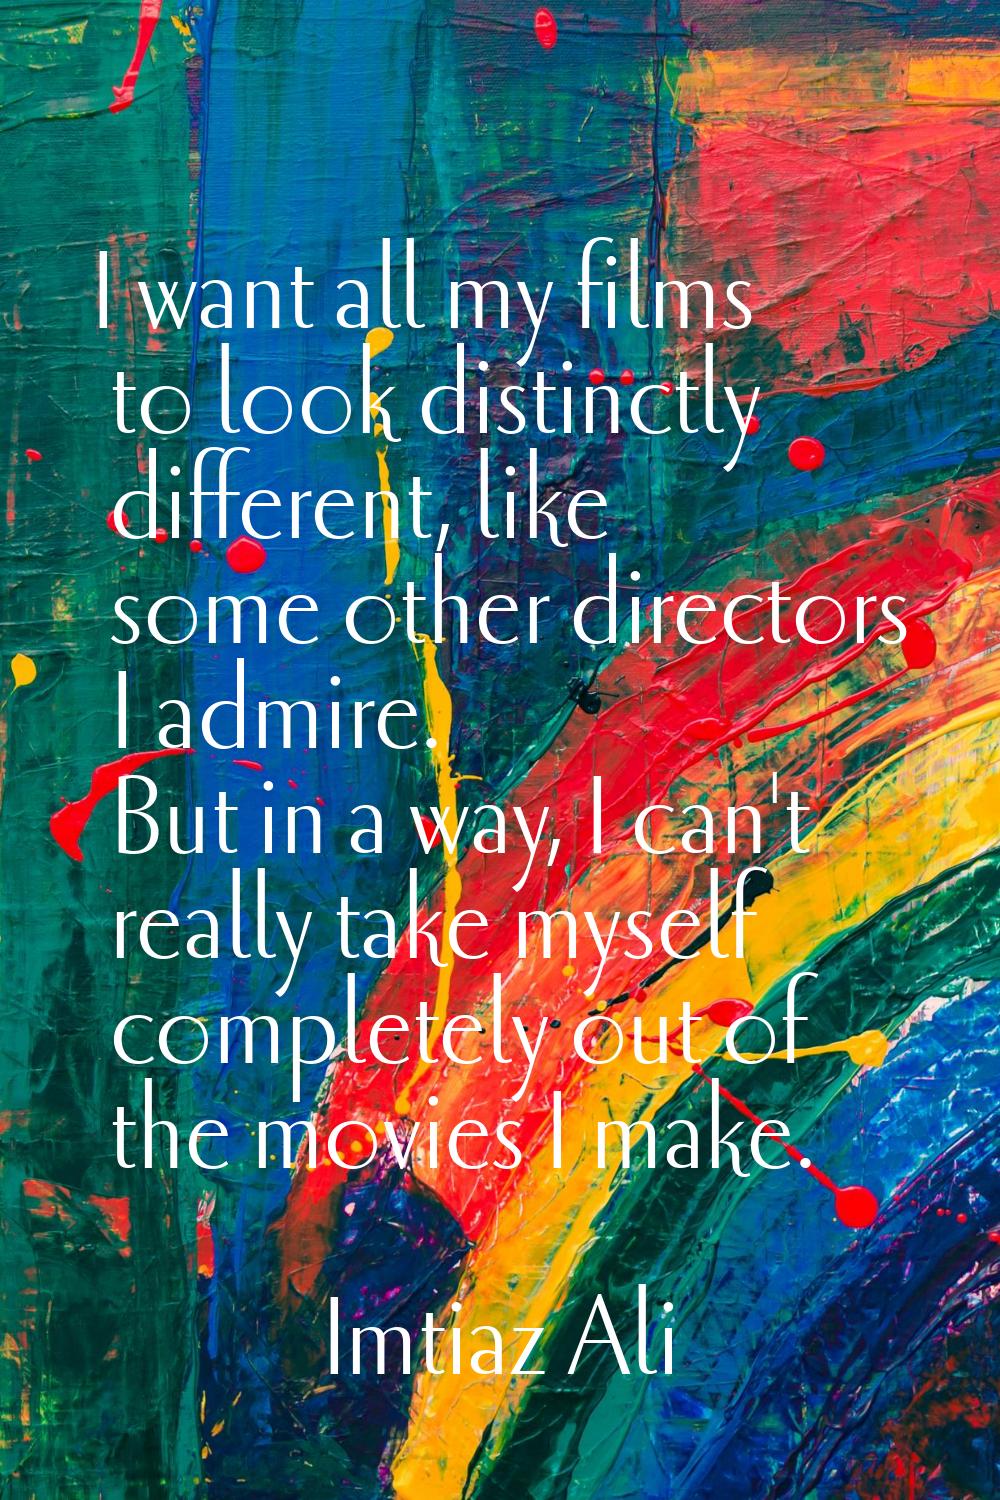 I want all my films to look distinctly different, like some other directors I admire. But in a way,